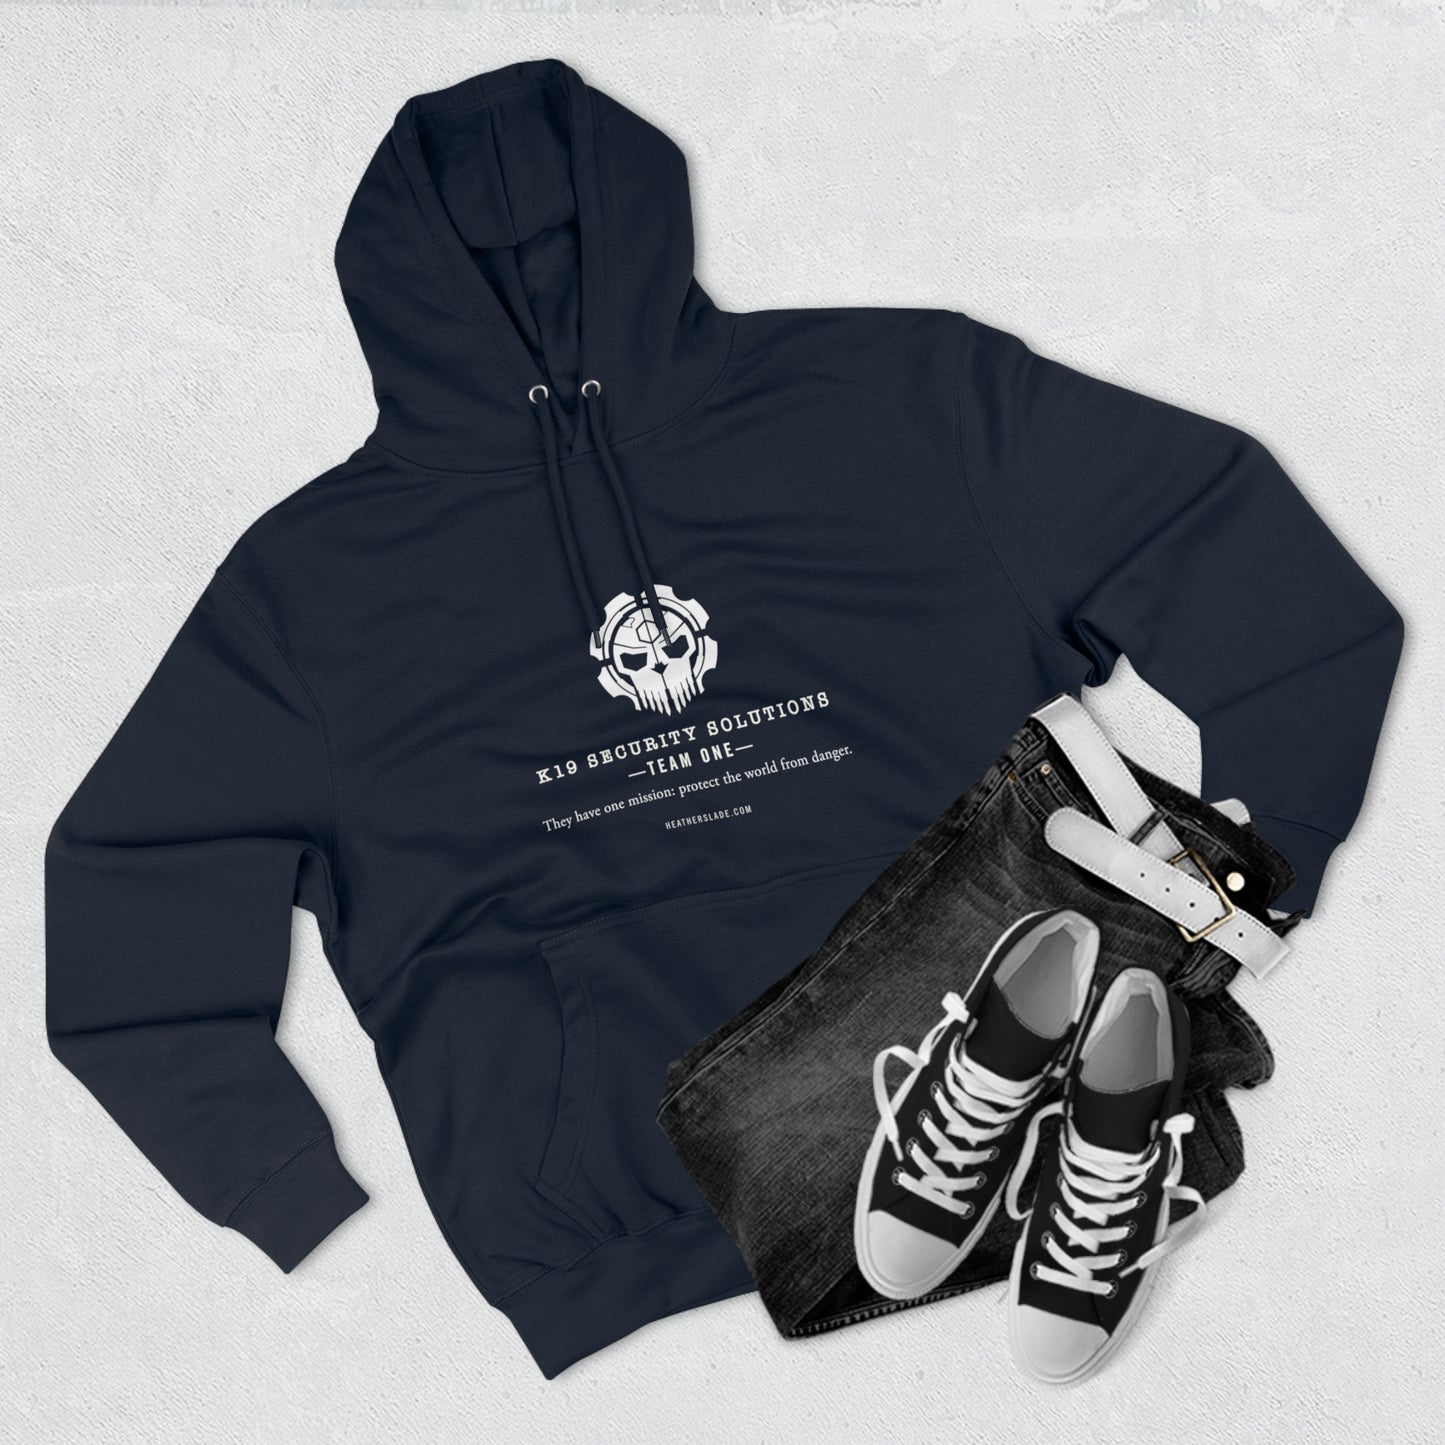 K19 Security Solutions Team One Pullover Hoodie